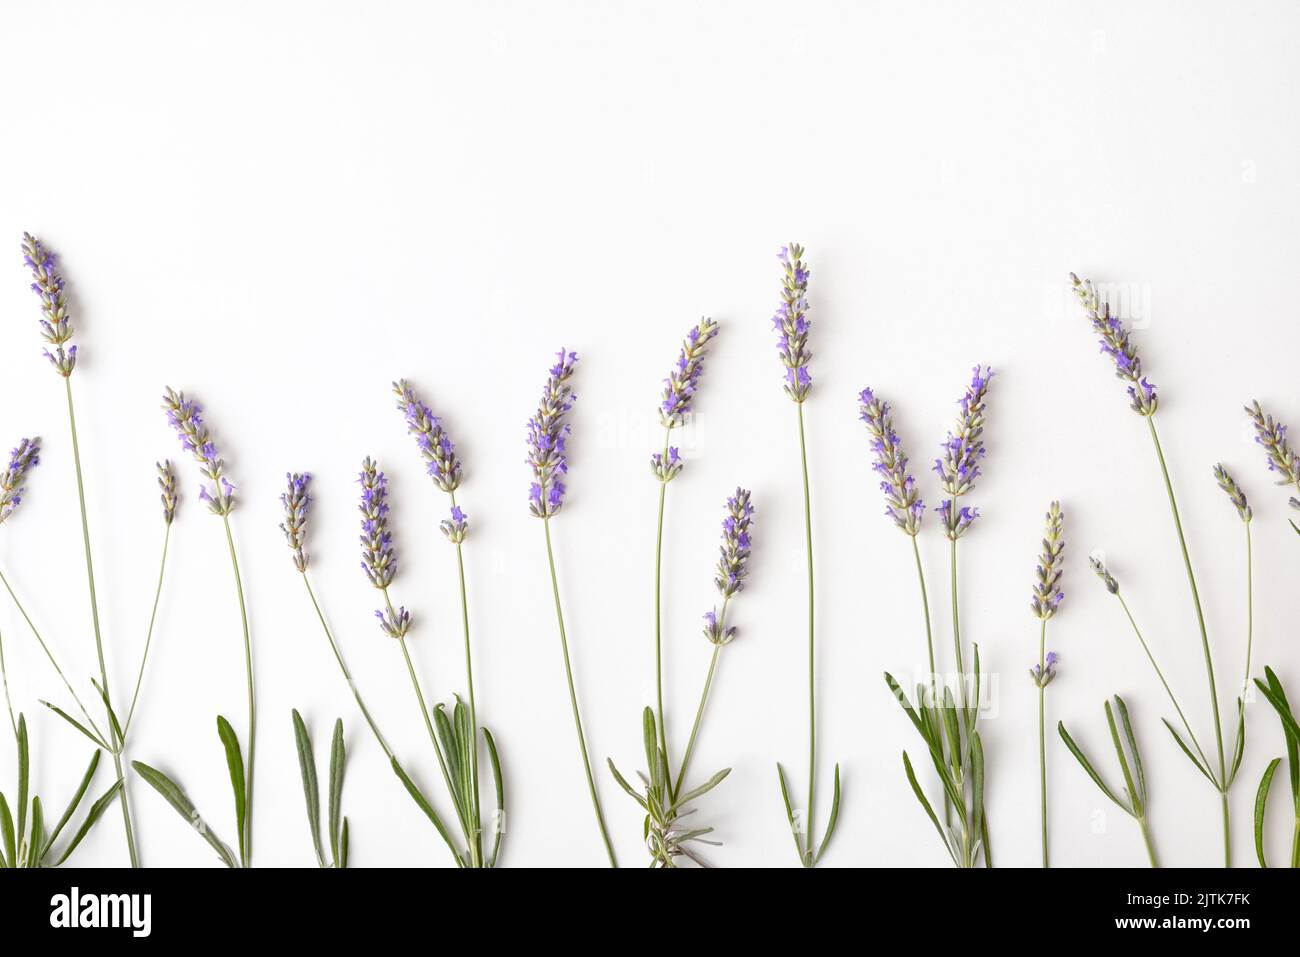 Floral background with blooming lavender spikes on white table. Top view. Horizontal composition. Stock Photo